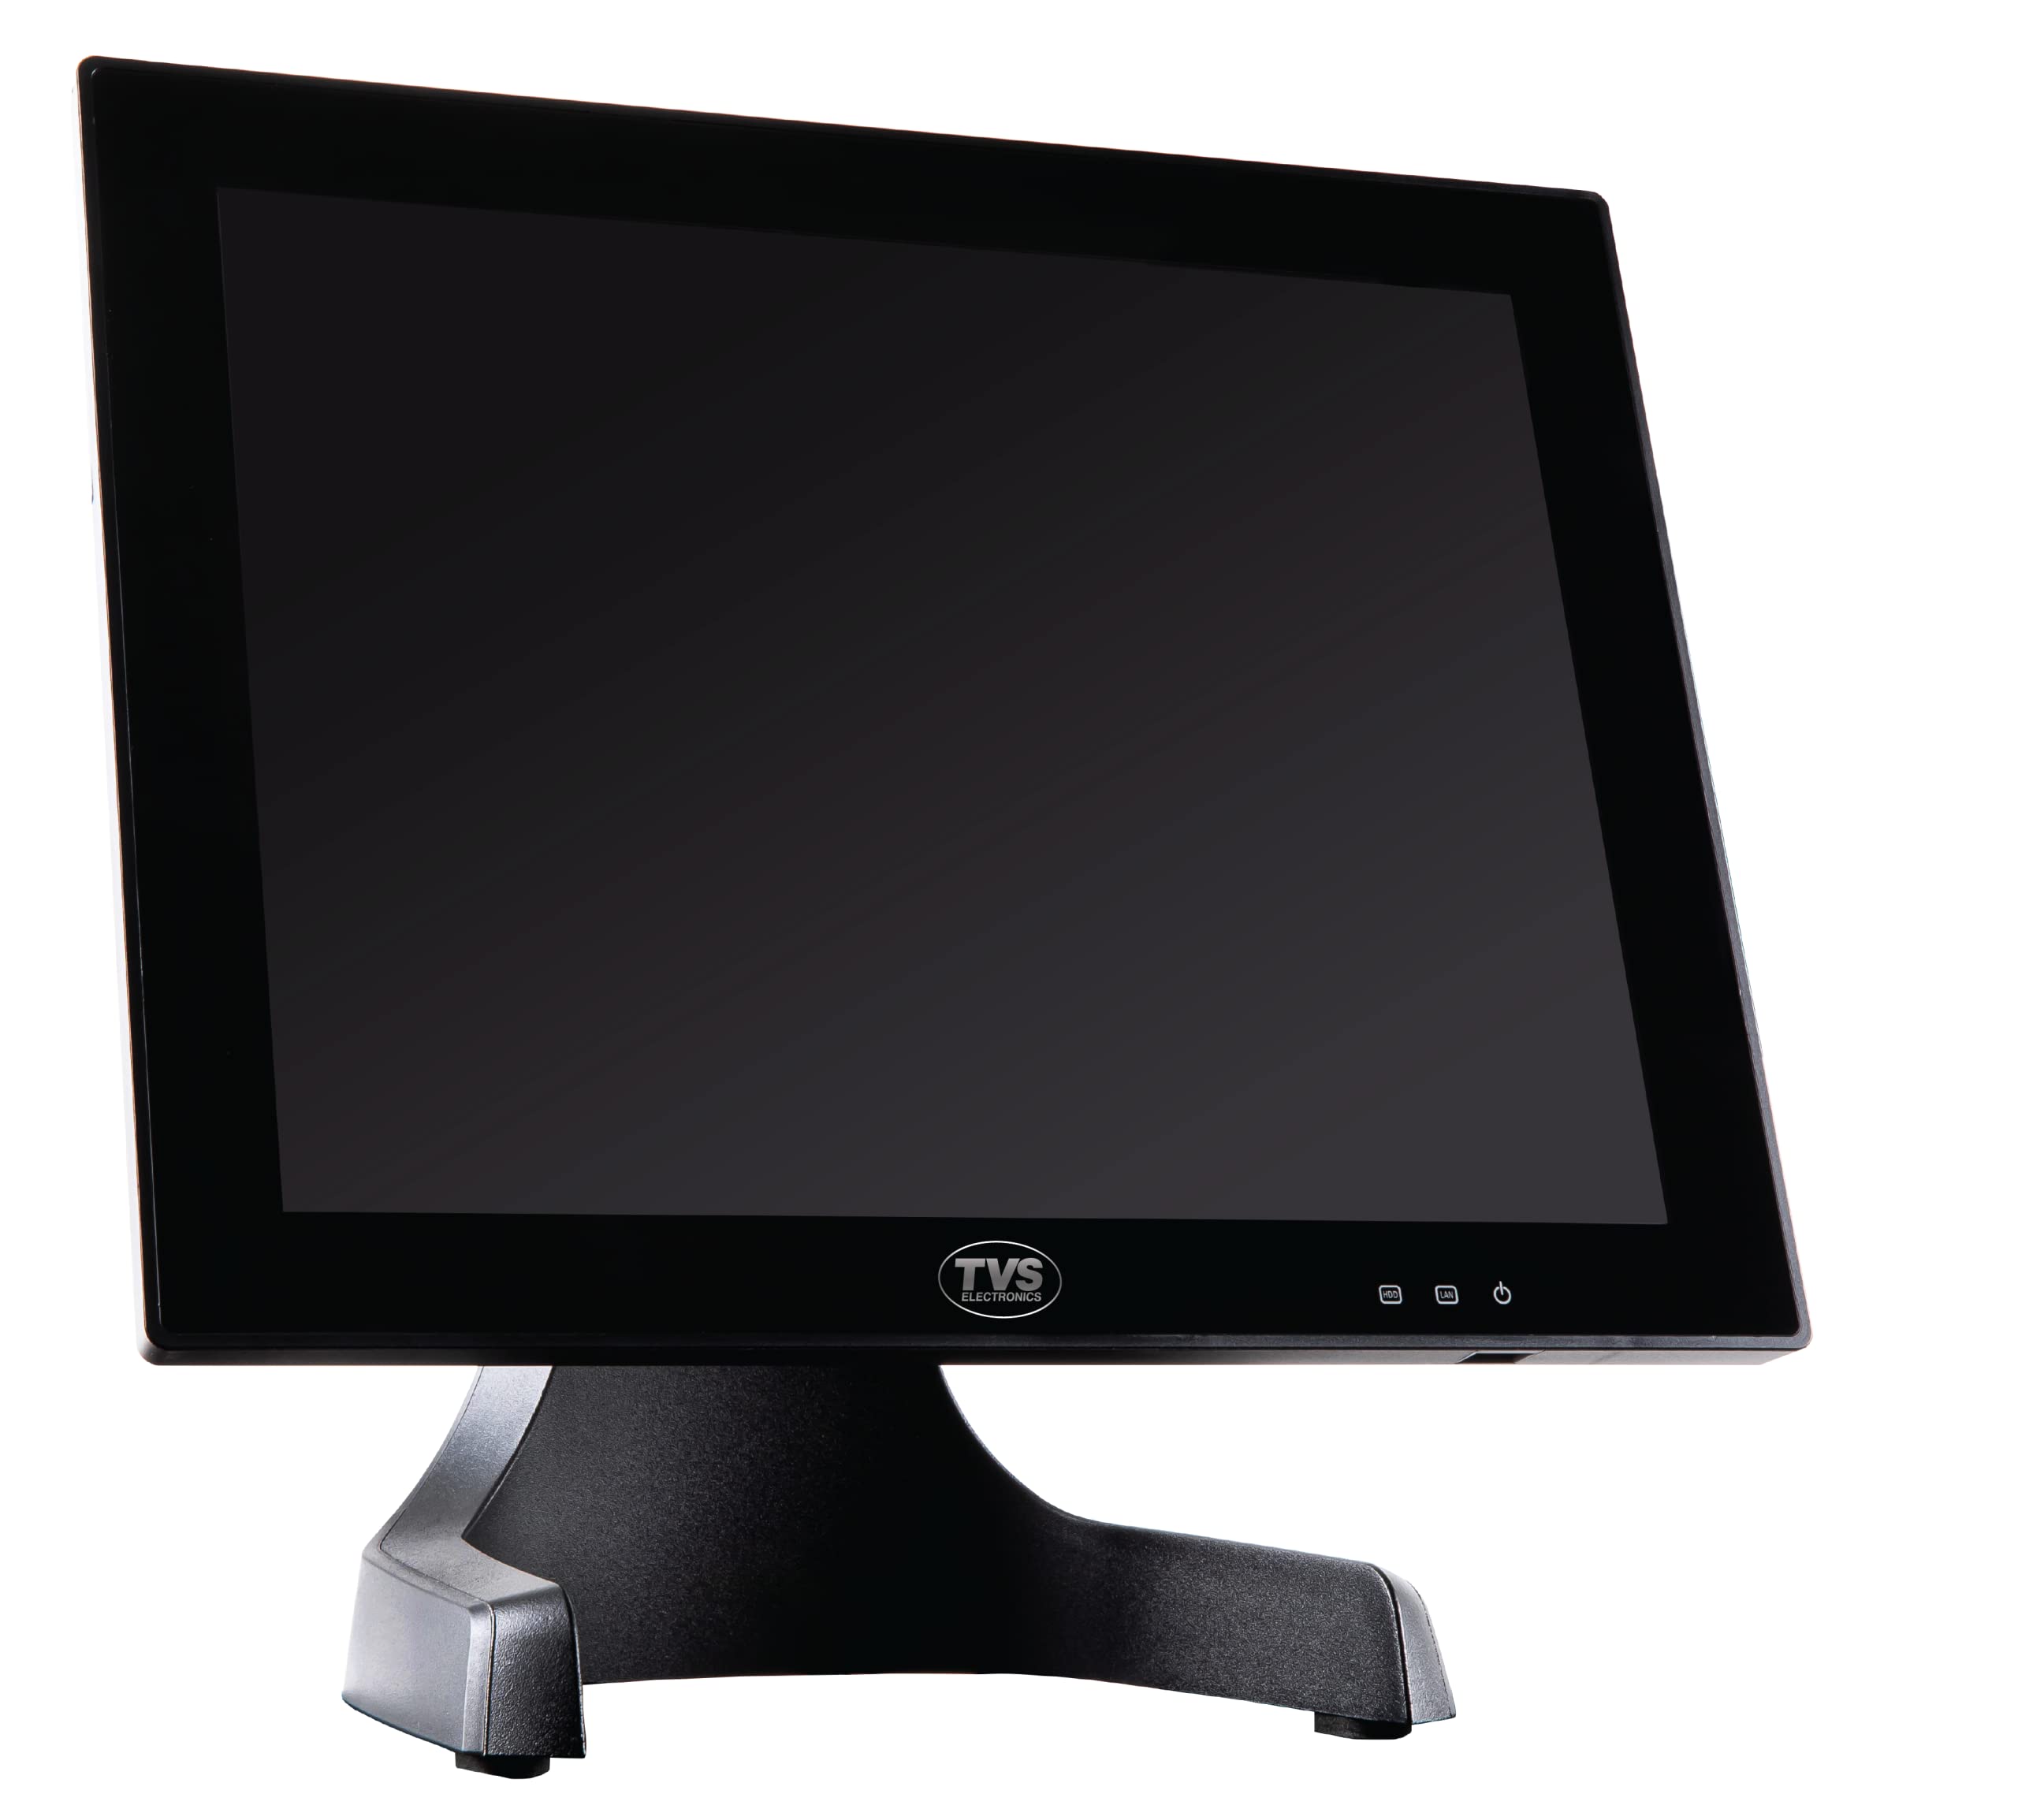 TVS TP 415C Touch POS system